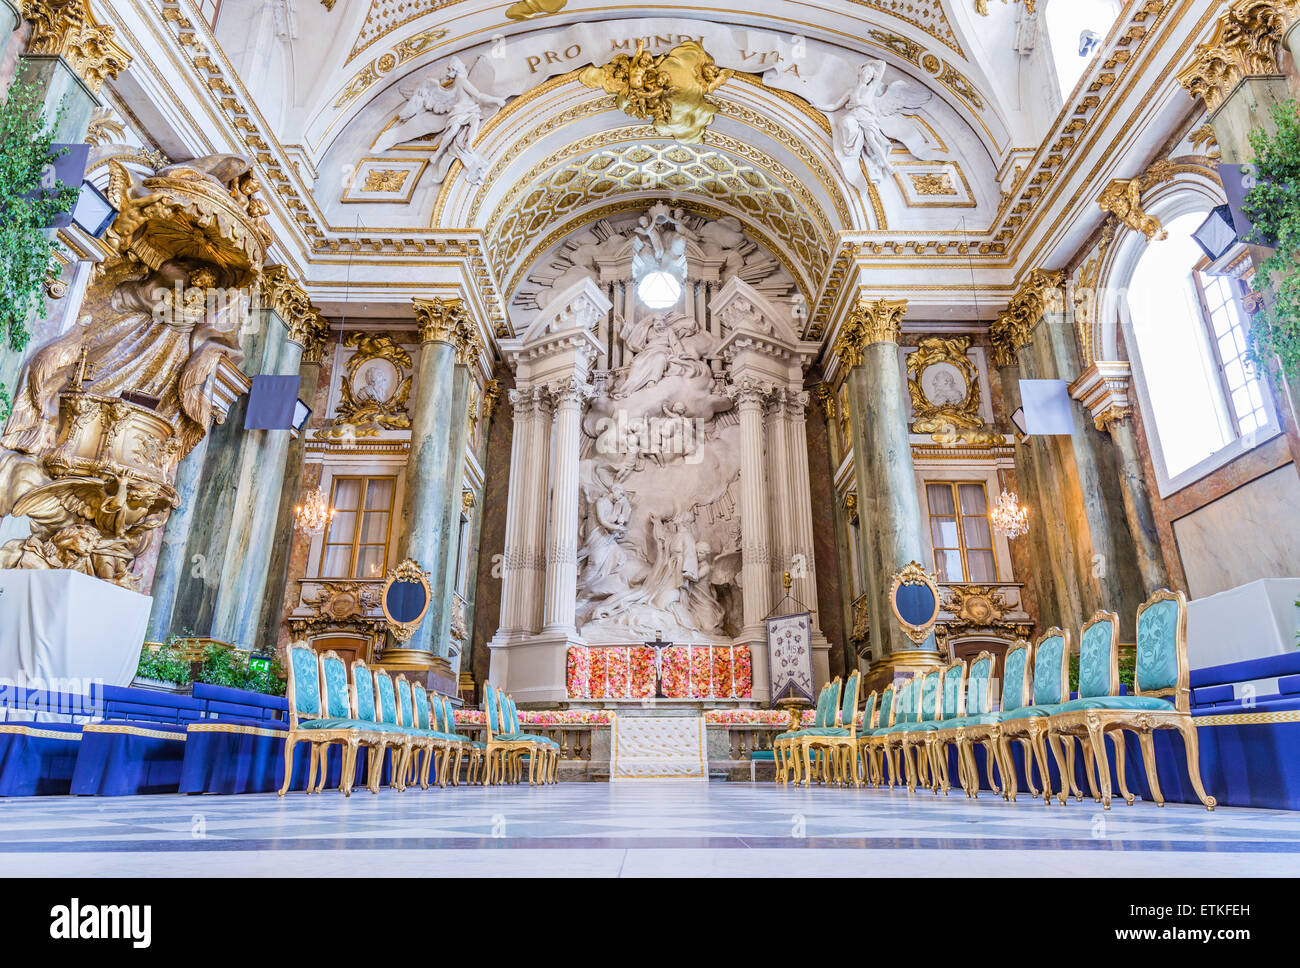 Stockholm - The Royal Chapel With Flower Decorations for Prince Wedding in Sweden Stock Photo